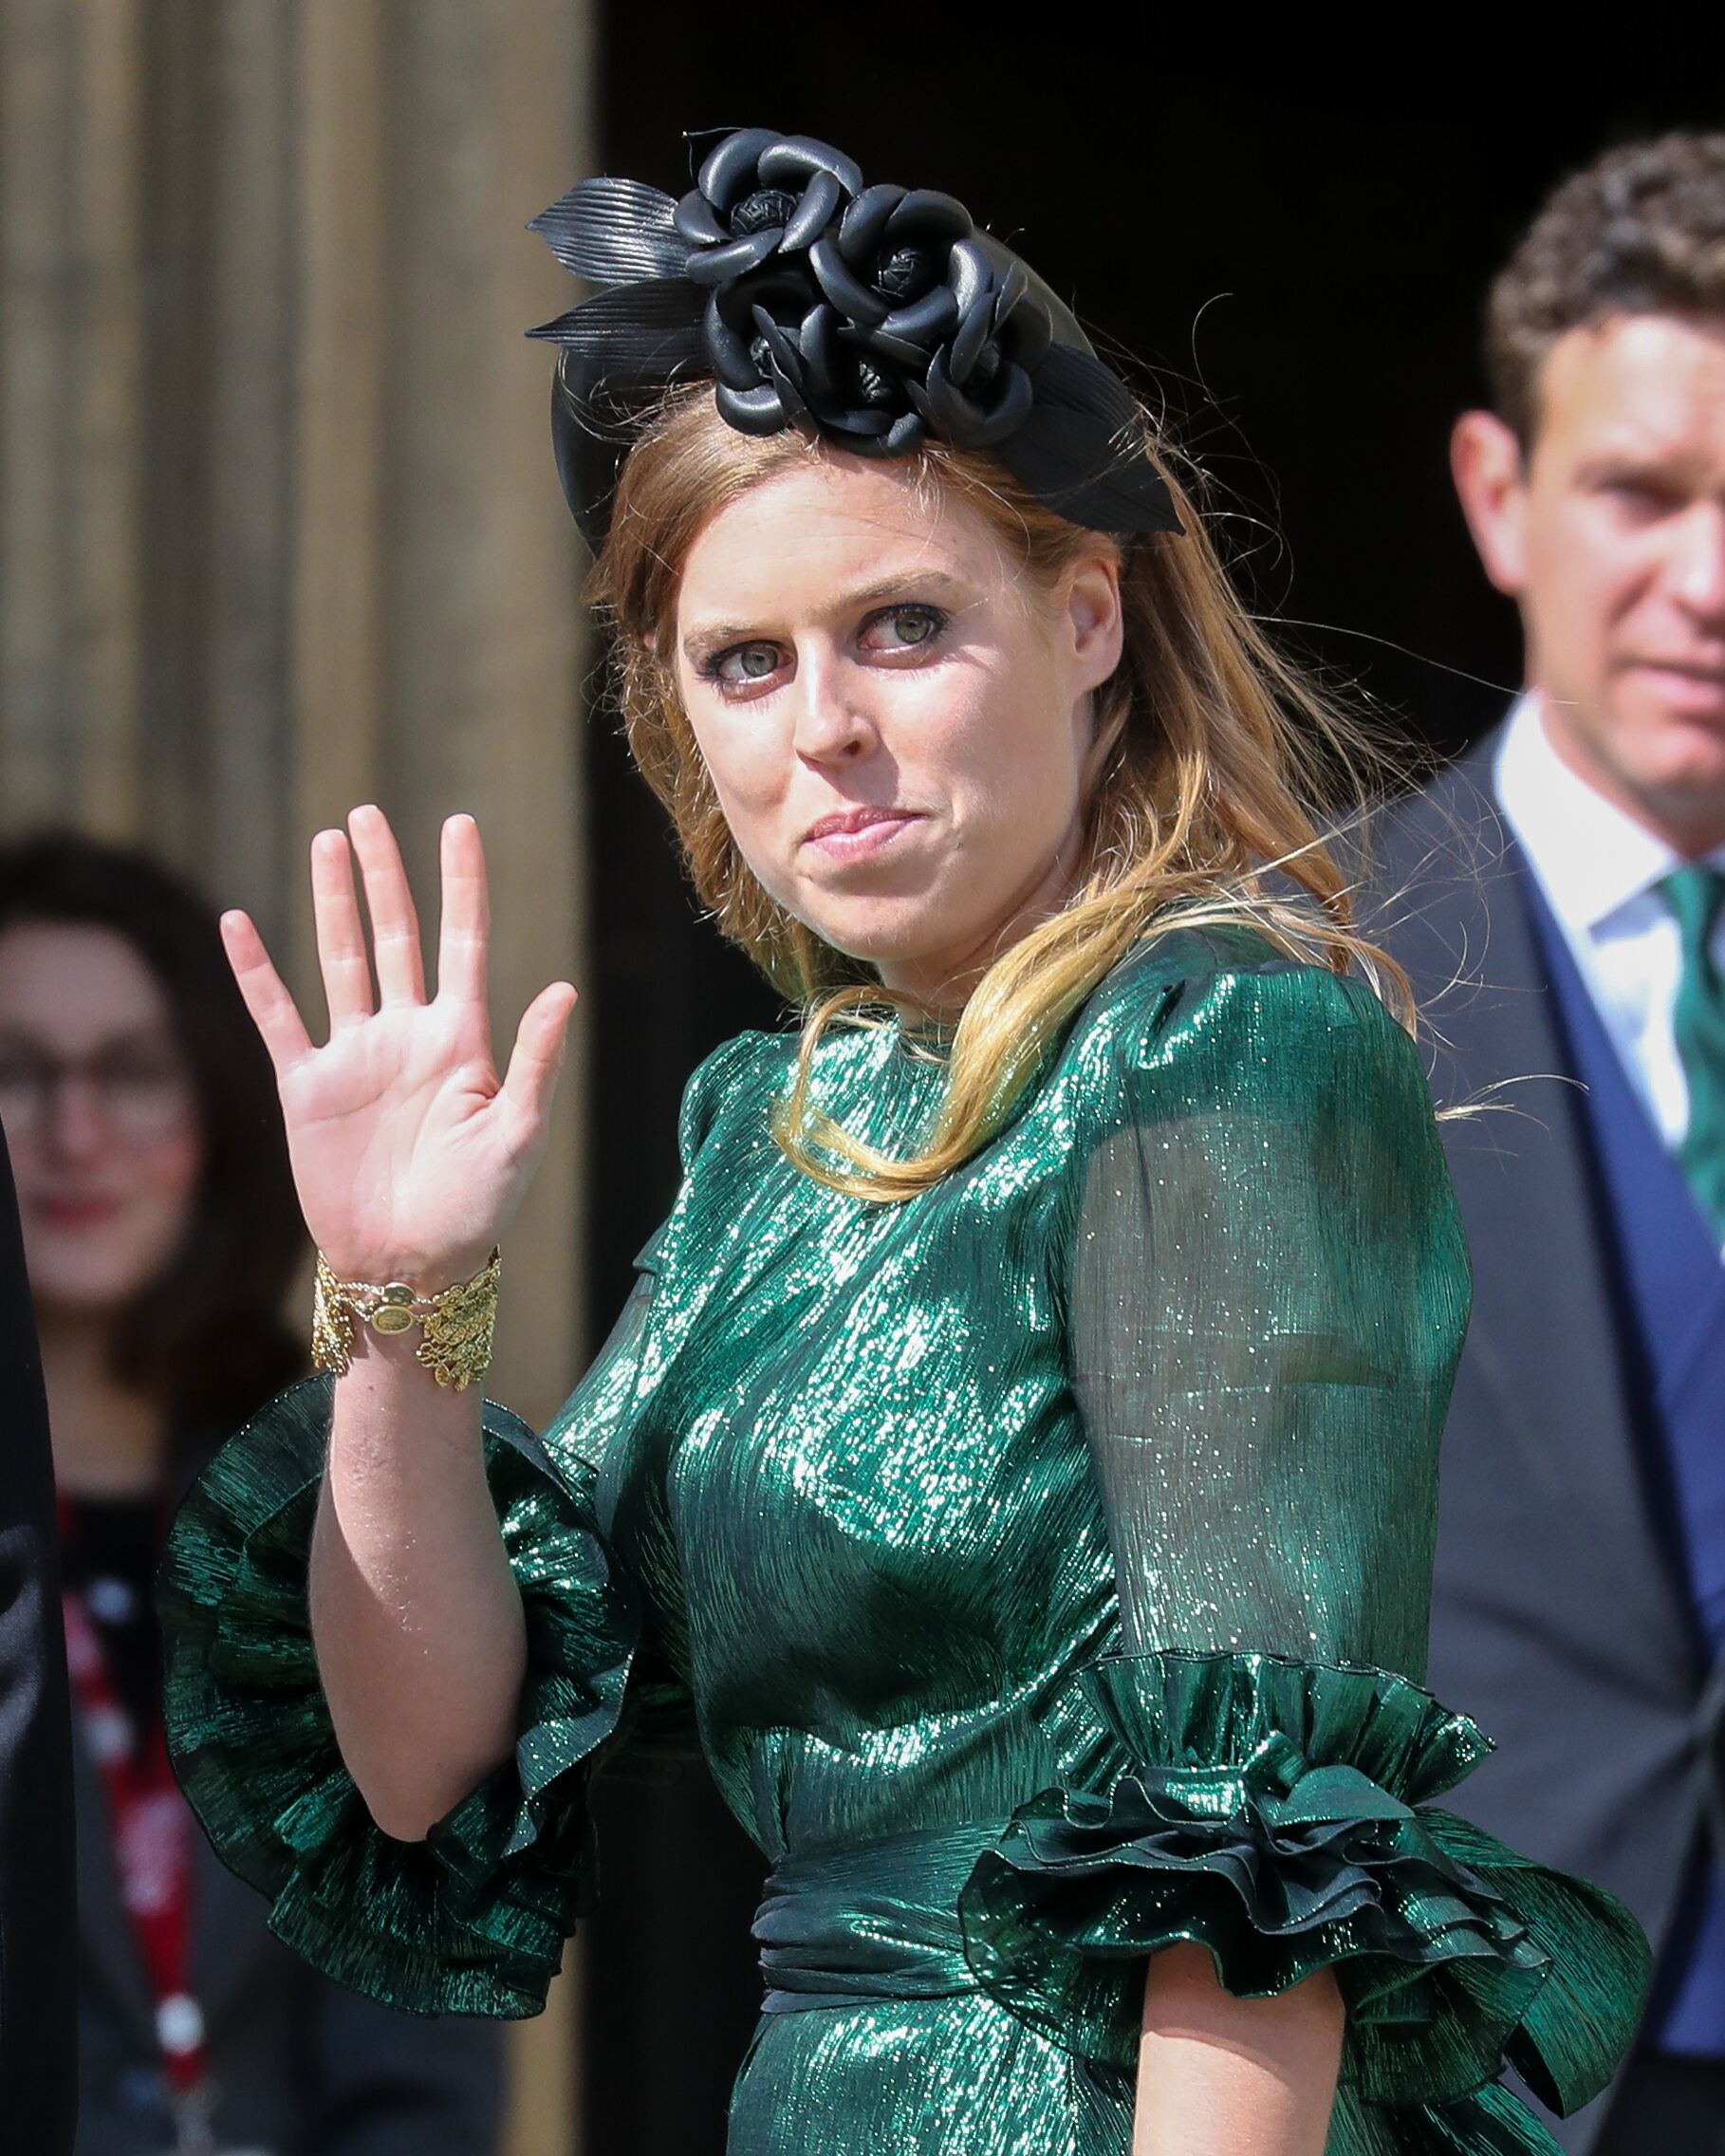  Princess Beatrice of York seen at the wedding of Ellie Goulding and Caspar Jopling at York Minster Cathedral on August 31, 2019 in York, England | Photo: Getty Images